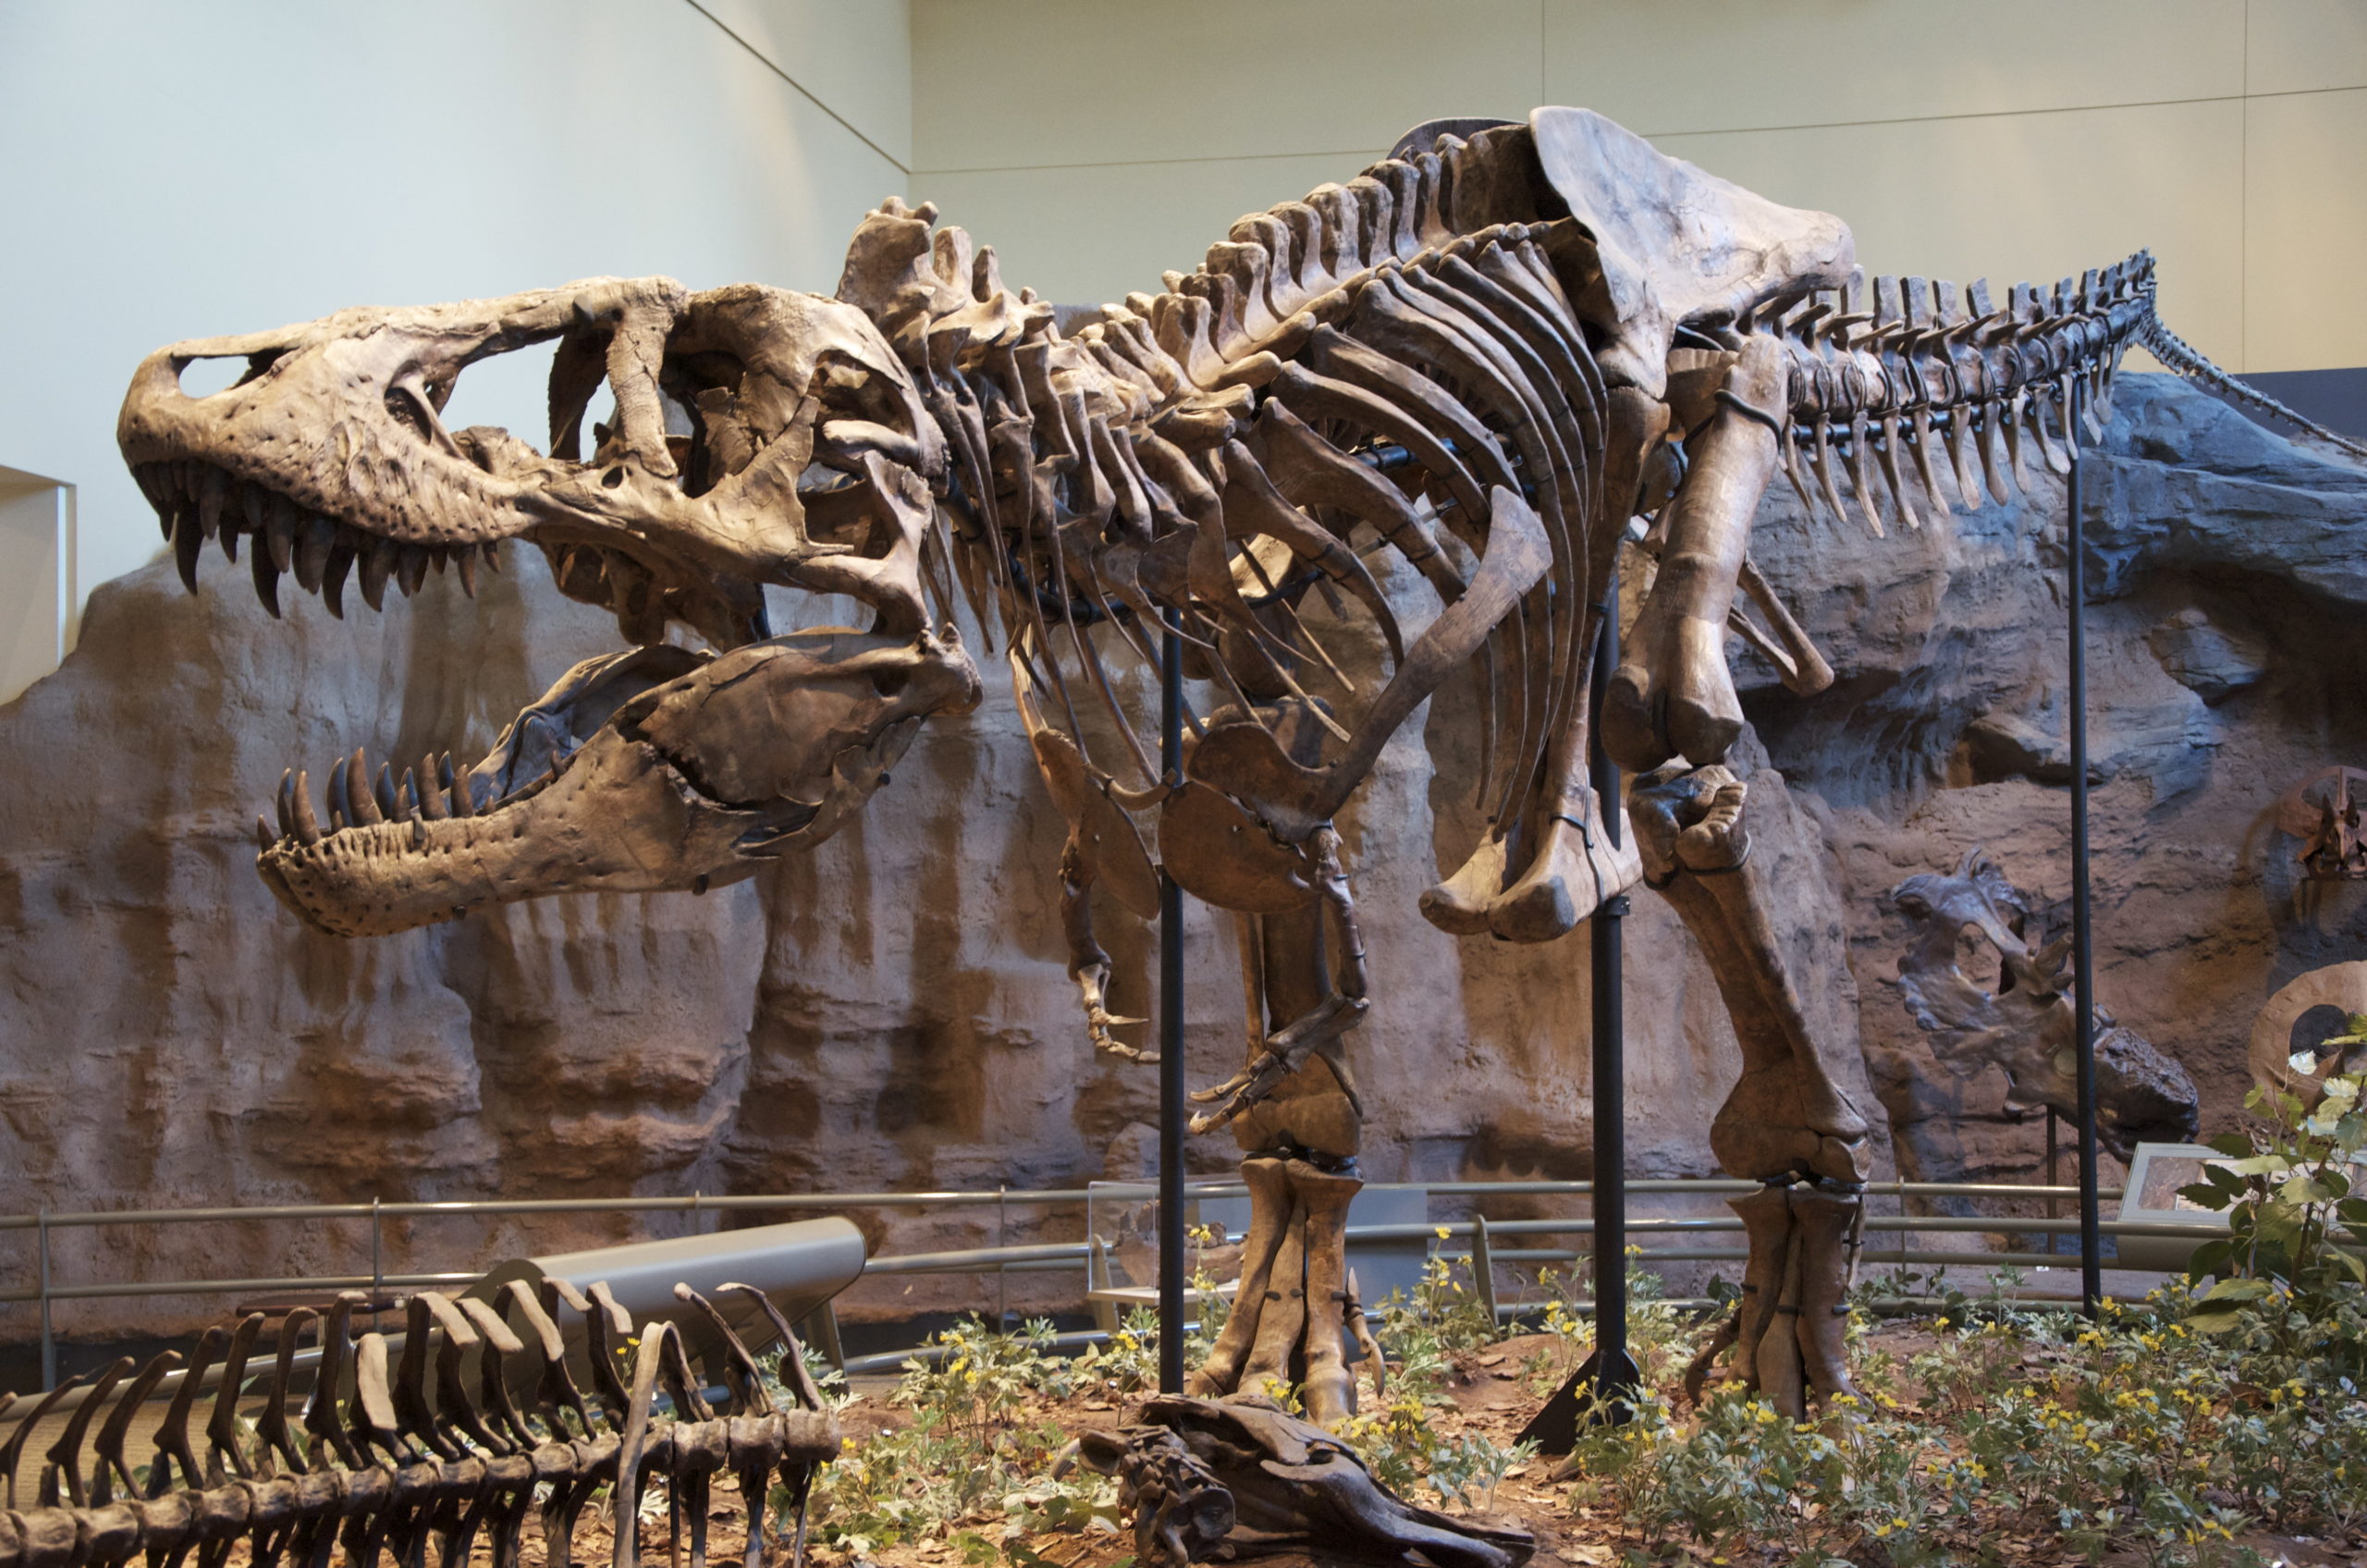 How Smart Was T. Rex? And Other Dino Questions You’ve Always Wanted To Ask